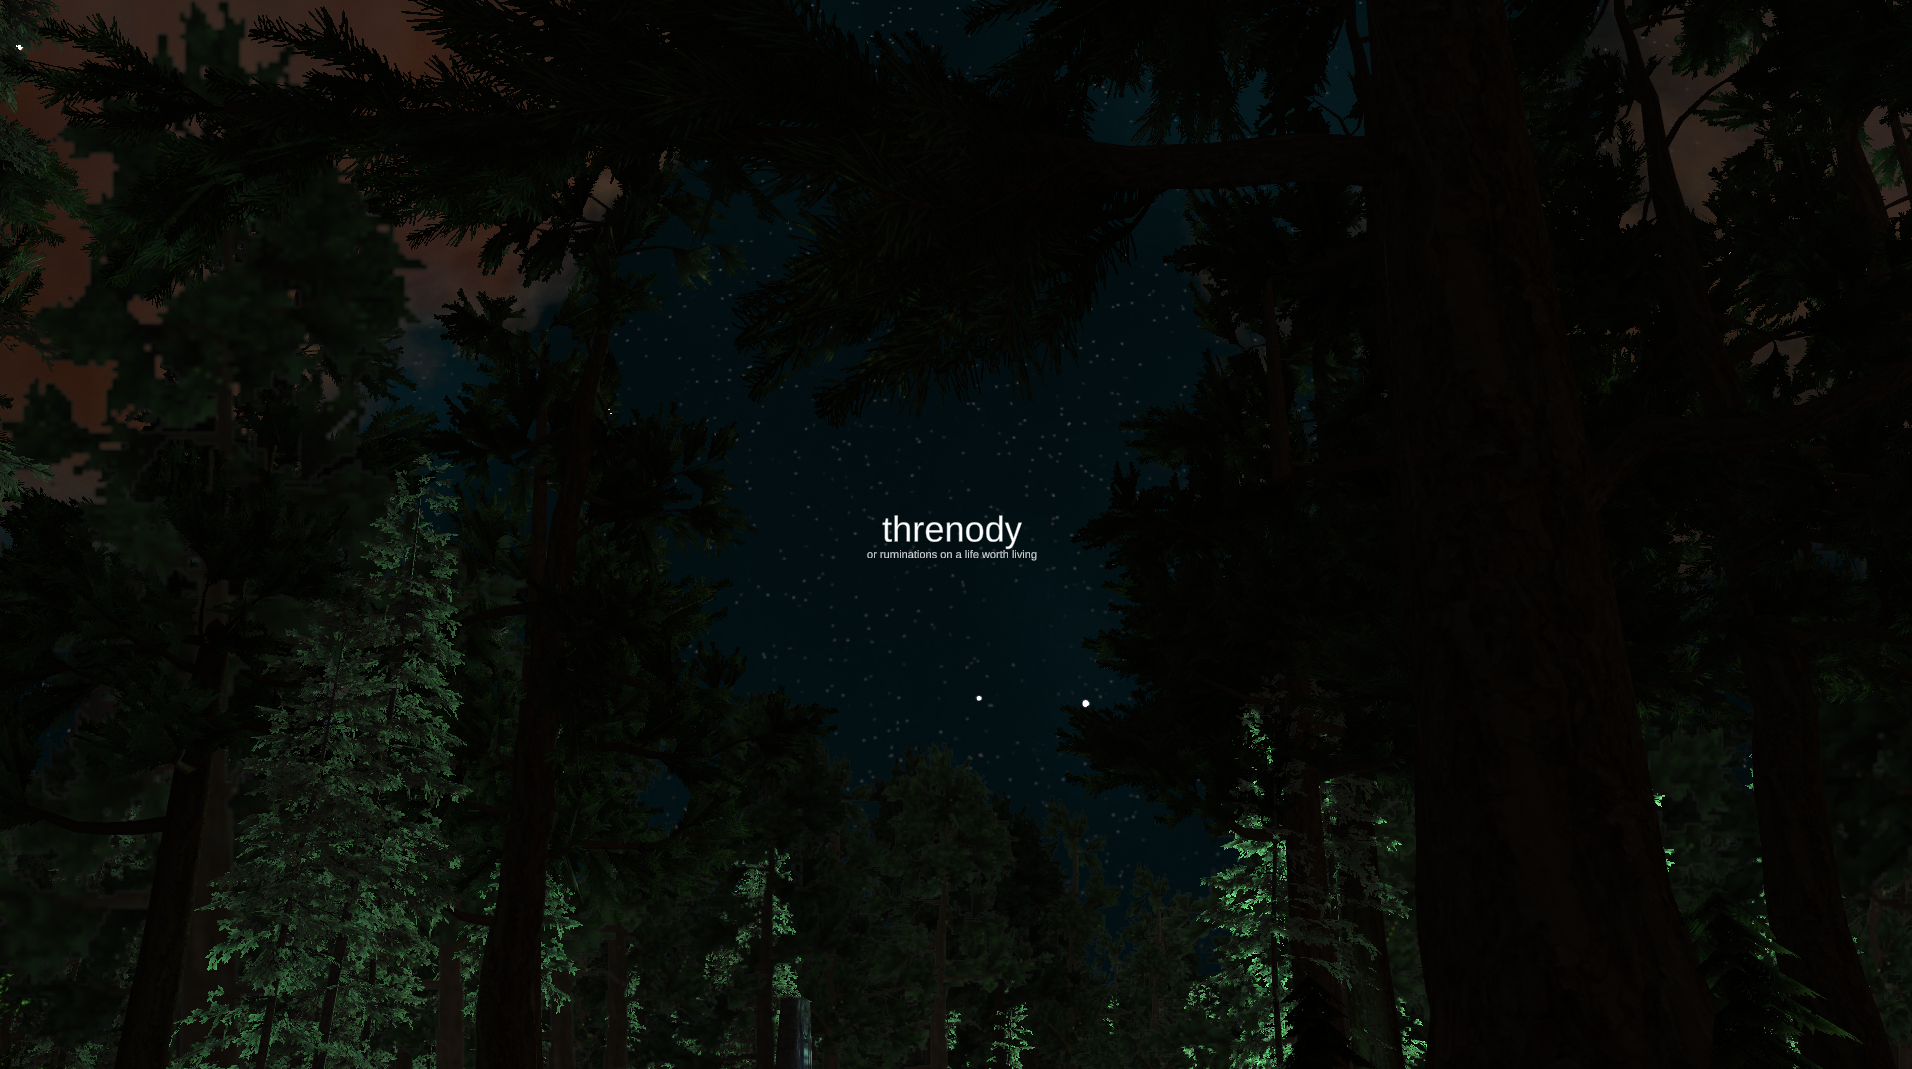 threnody (or ruminations on a life worth living)